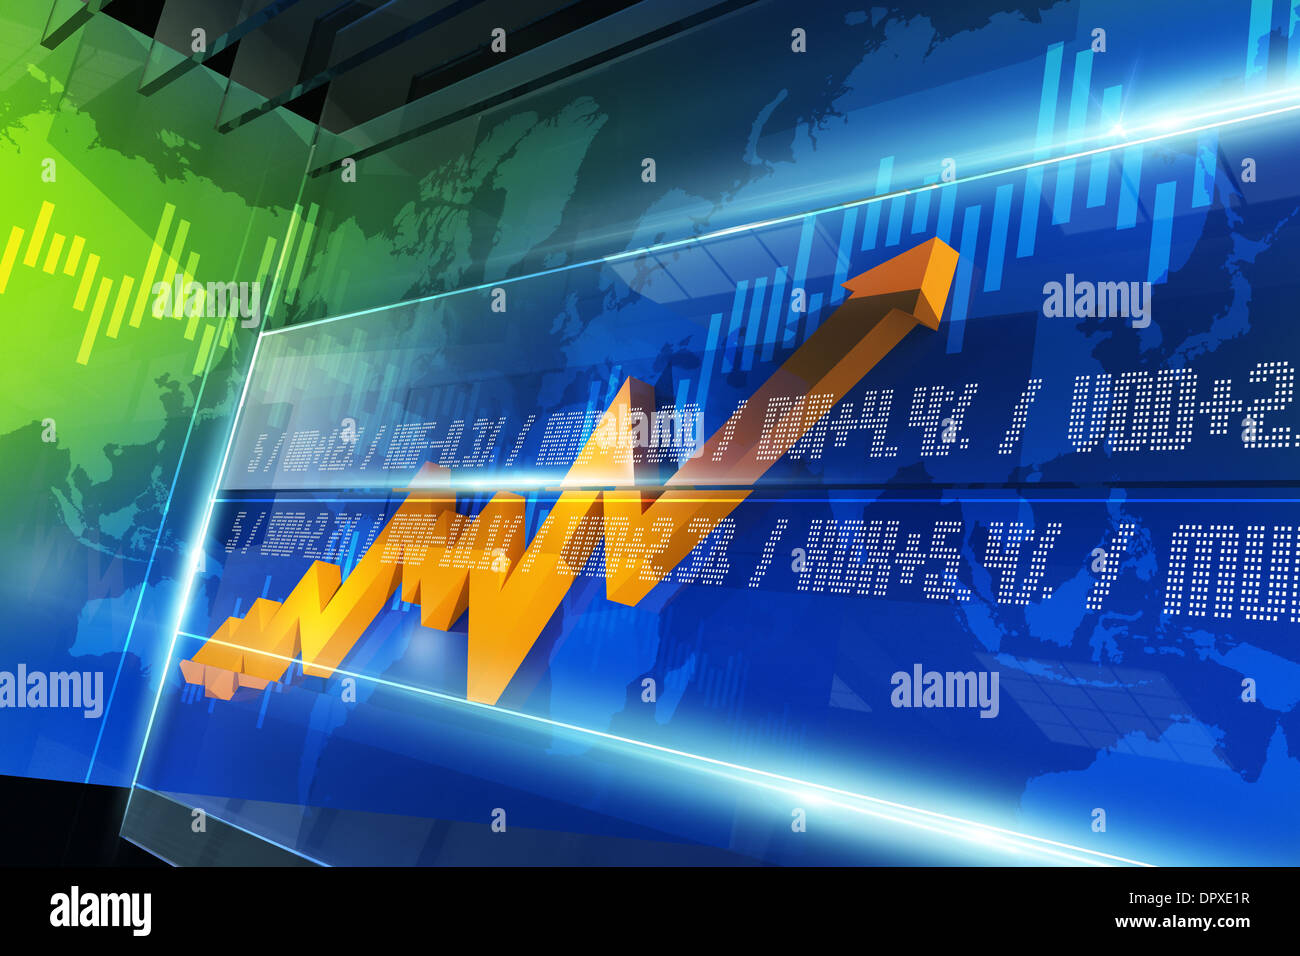 Abstract Stock Market Chart with Glassy Elements, Orange Stat Arrow and World Map. 3D Render Illustration. Stock Photo